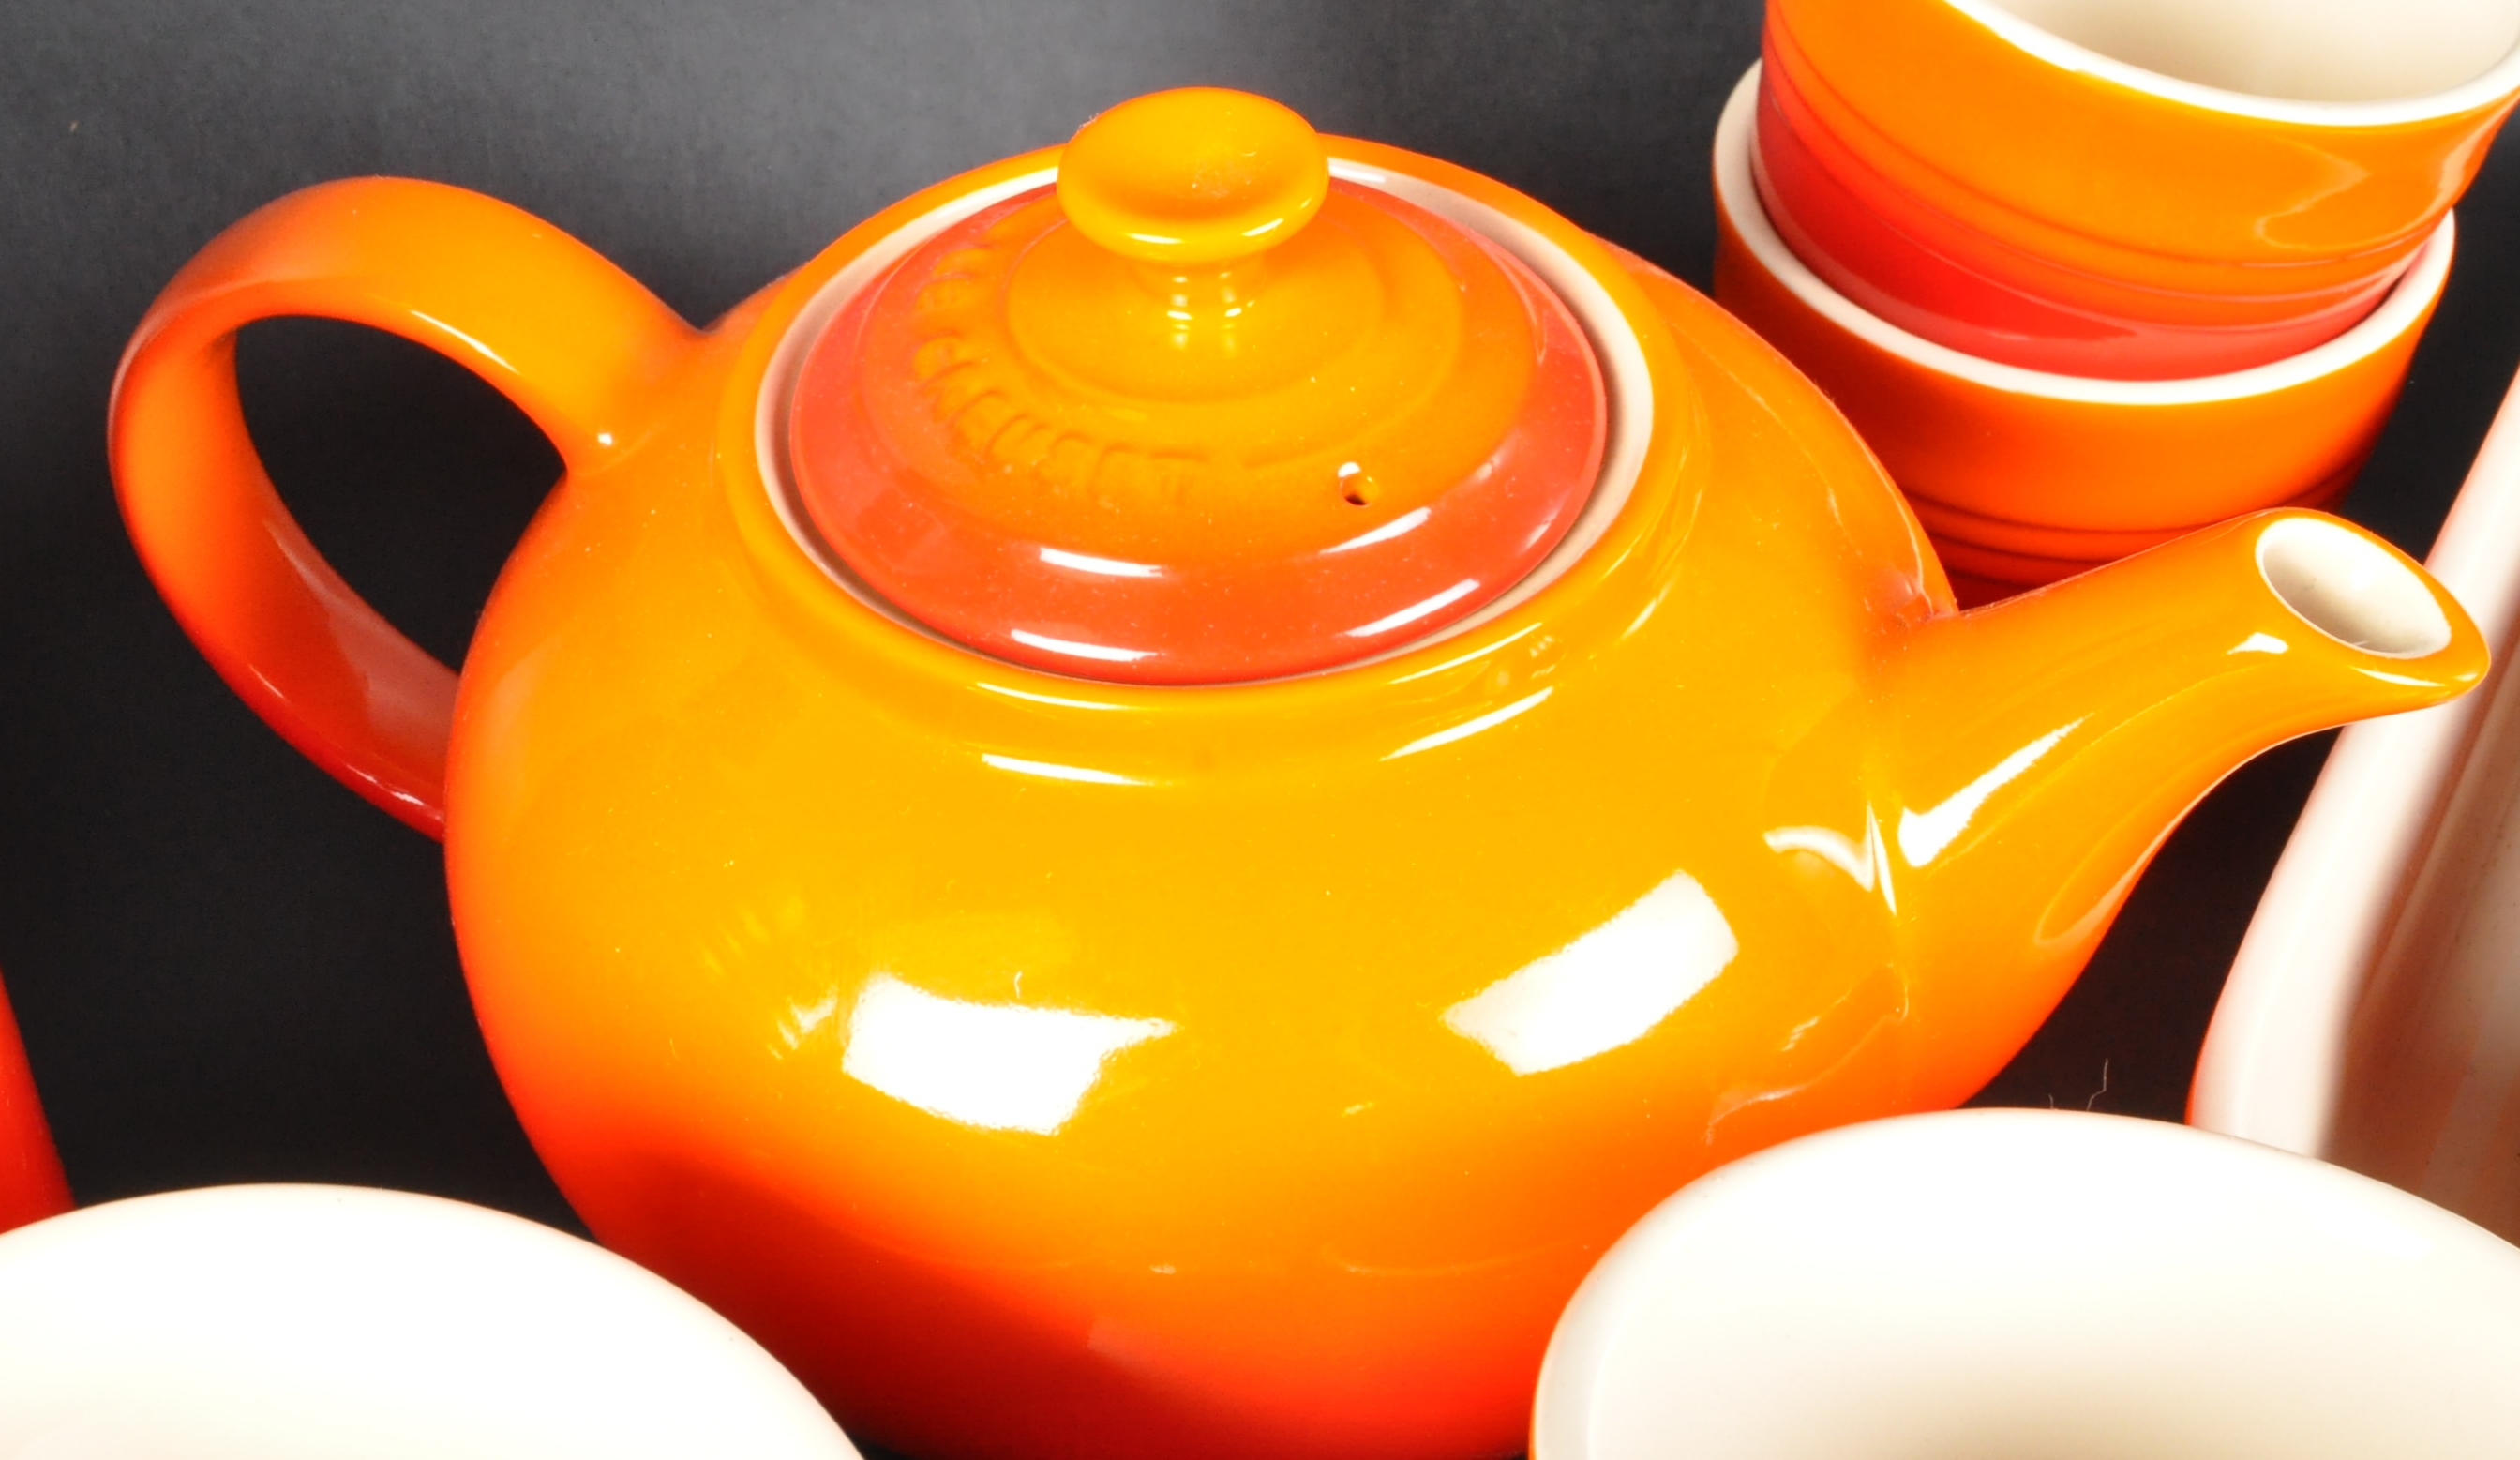 LE CREUSET - SELECTION OF CERAMIC KITCHEN TABLEWARES - Image 6 of 12